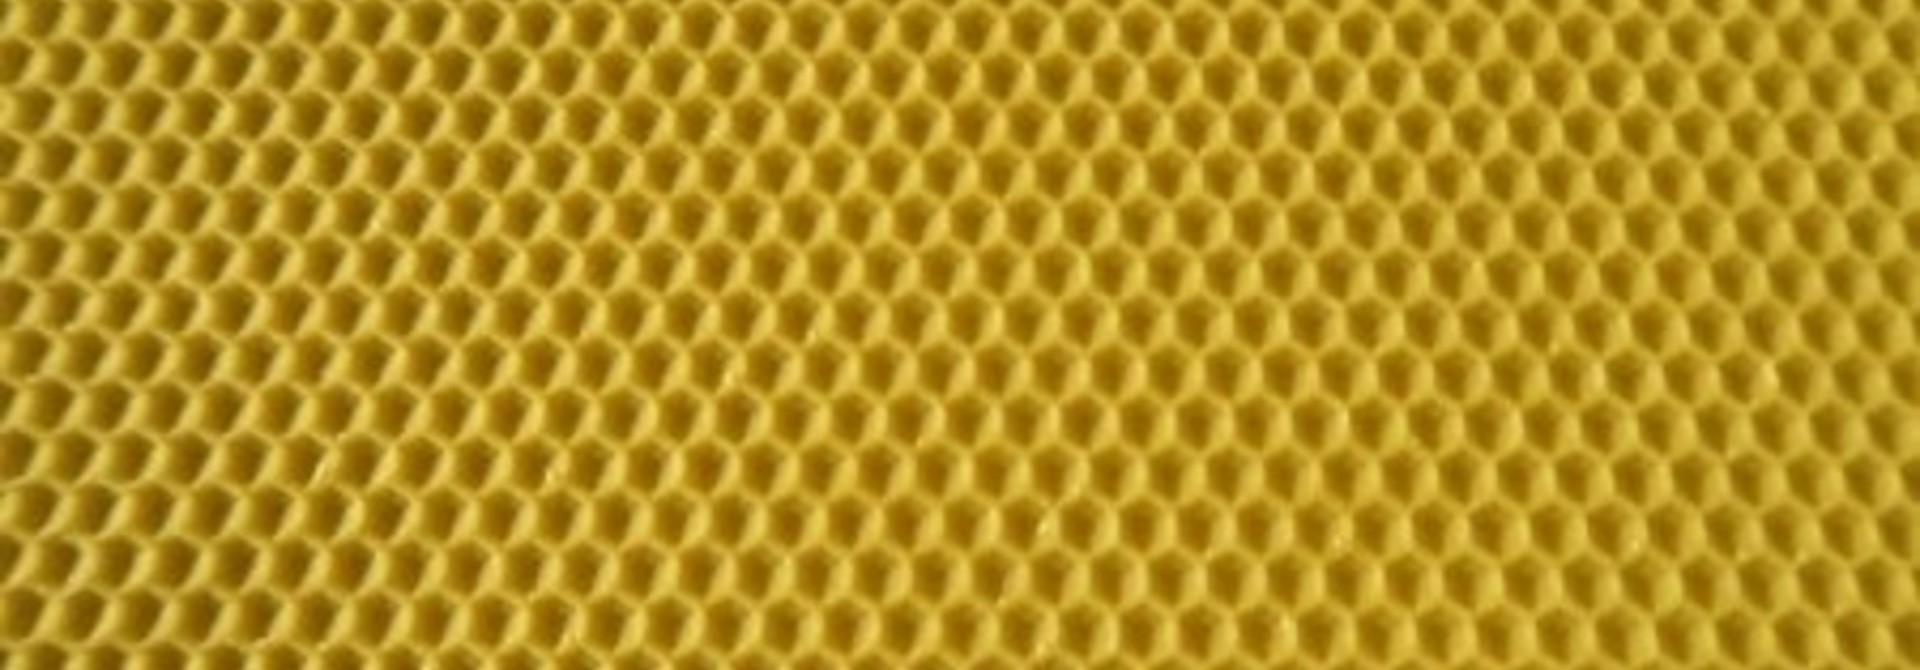 Certified beeswax foundation - AZ hive